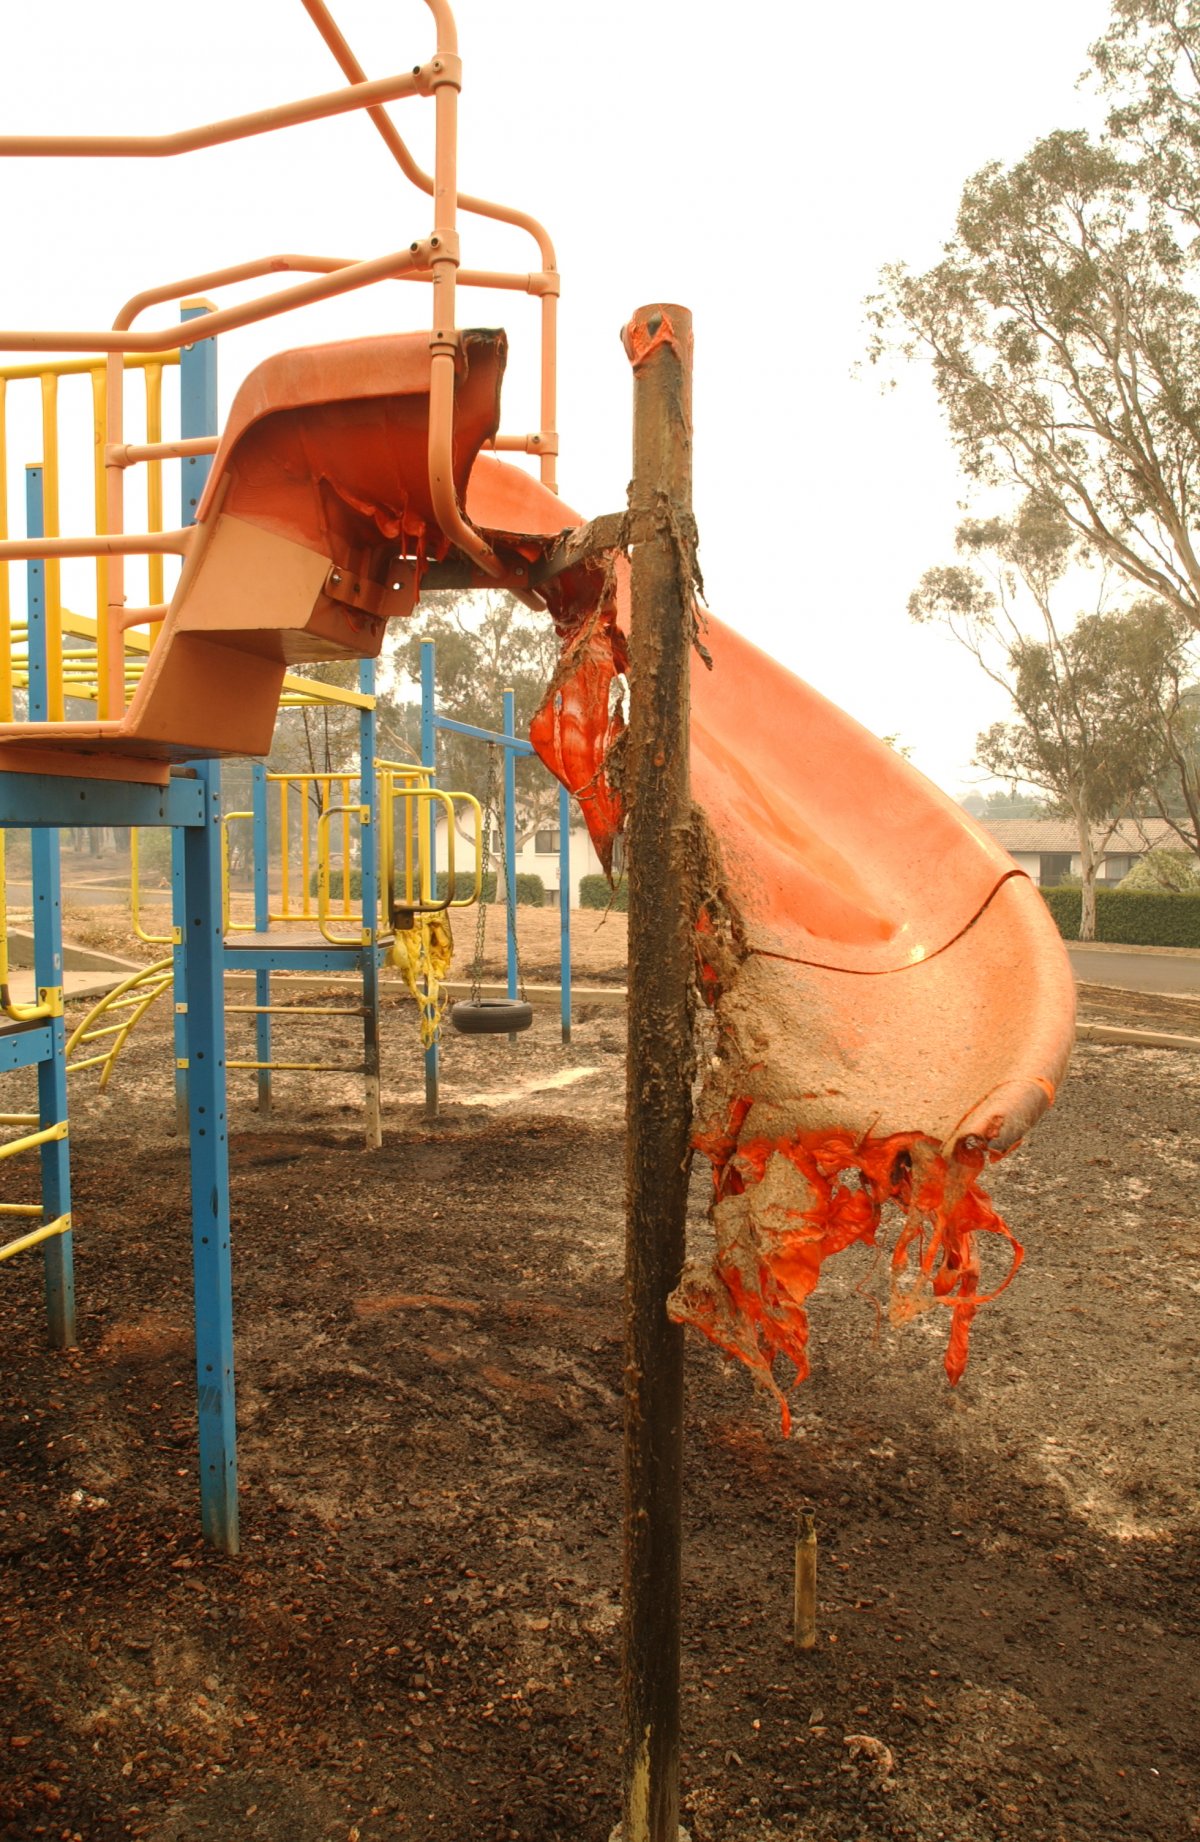 A children's playground slide is half melted after a fire burned through the playground. The surrounding metal of the playground is relatively untouched.